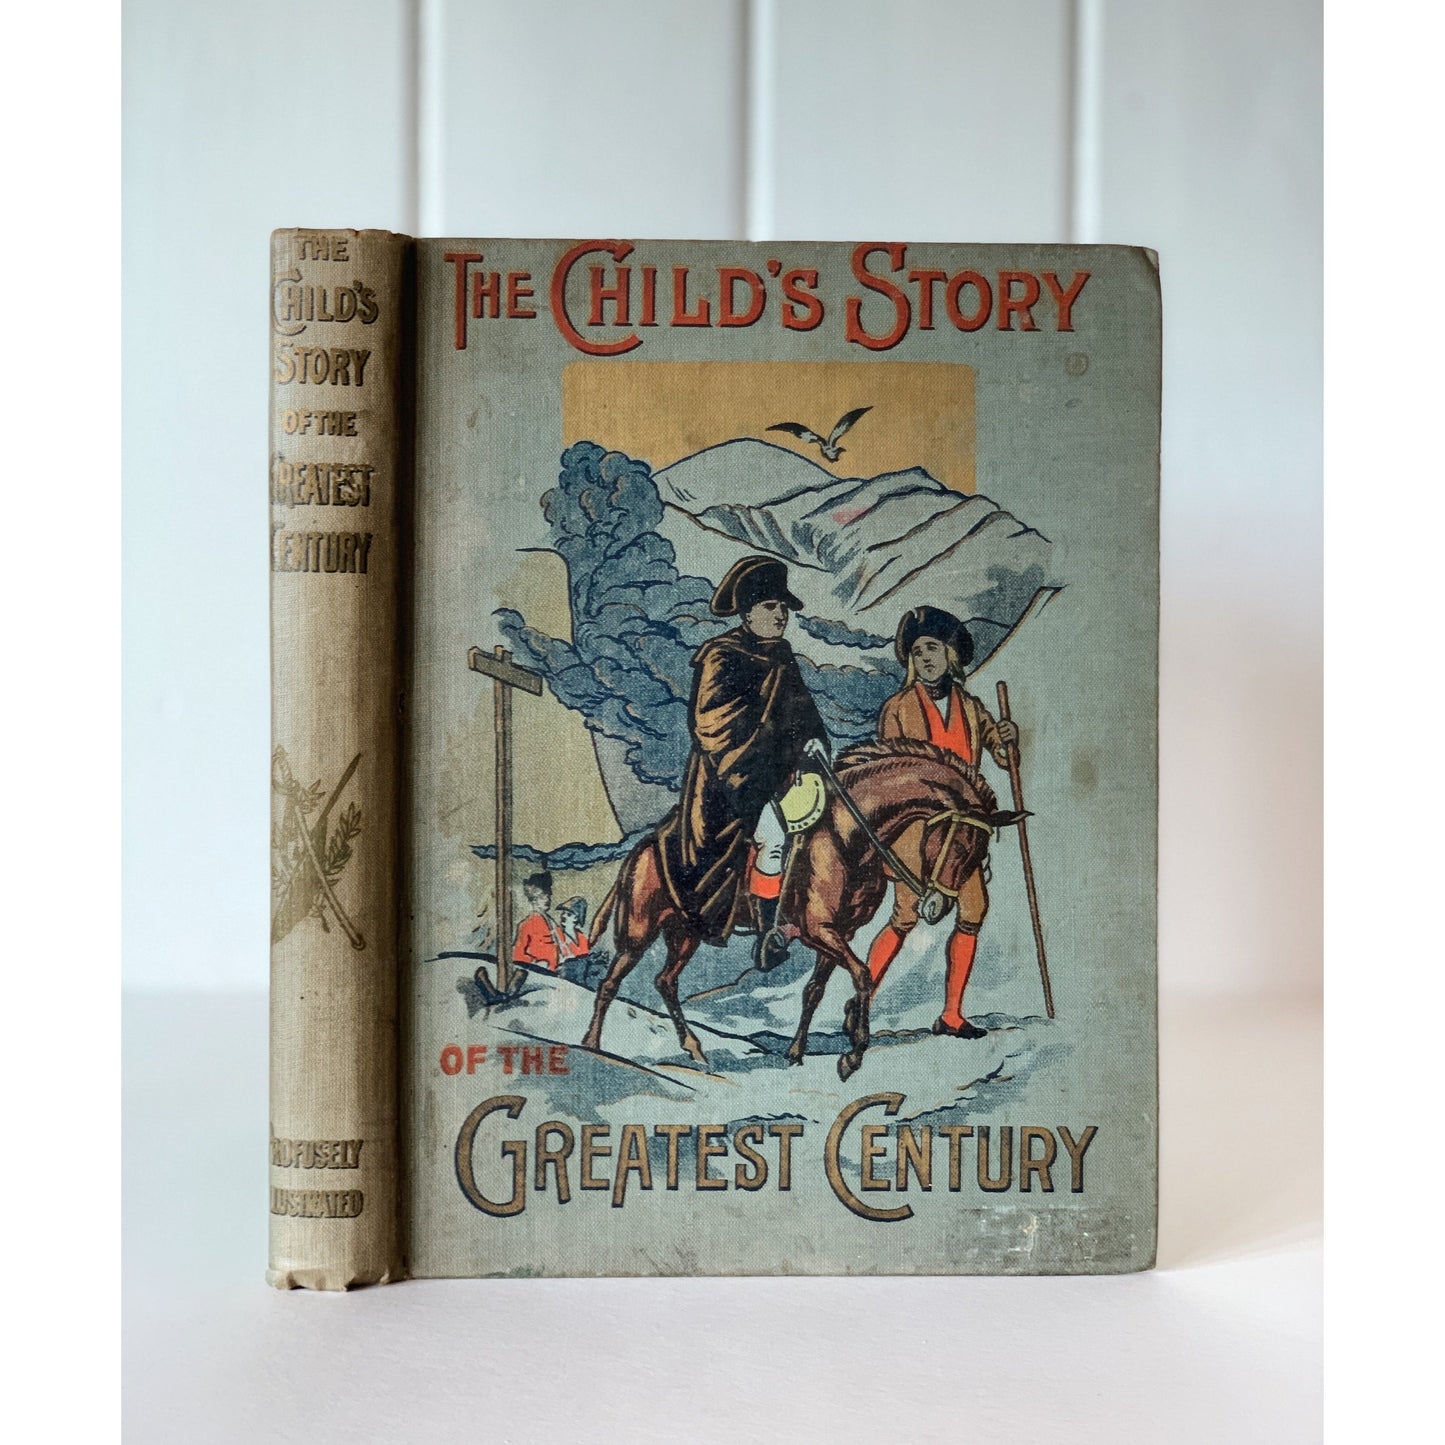 The Child's Story of the Greatest Century, 1901 Hardcover, Illustrated